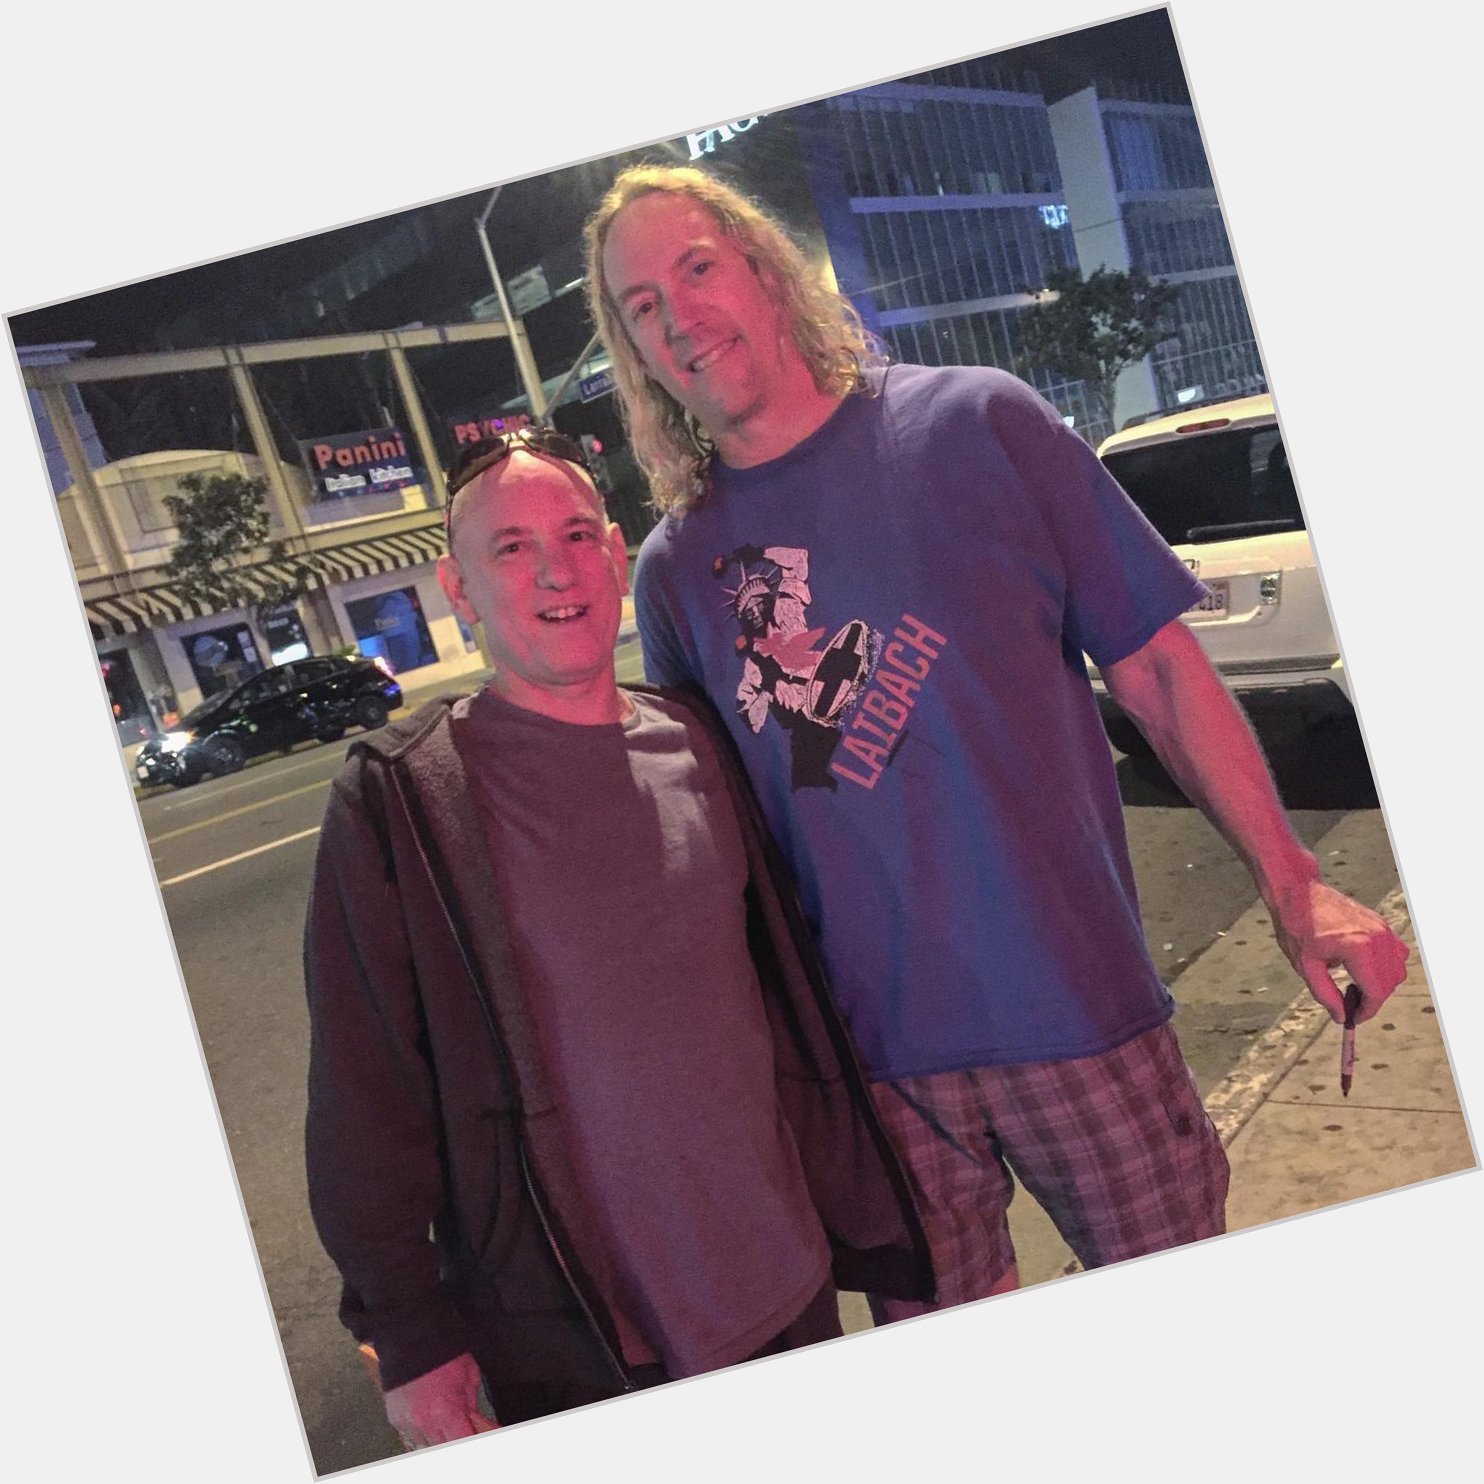 Happy Birthday to Danny Carey! Seen here with an obsessed fan outside the Viper Room at 3 AM back in 2016. 